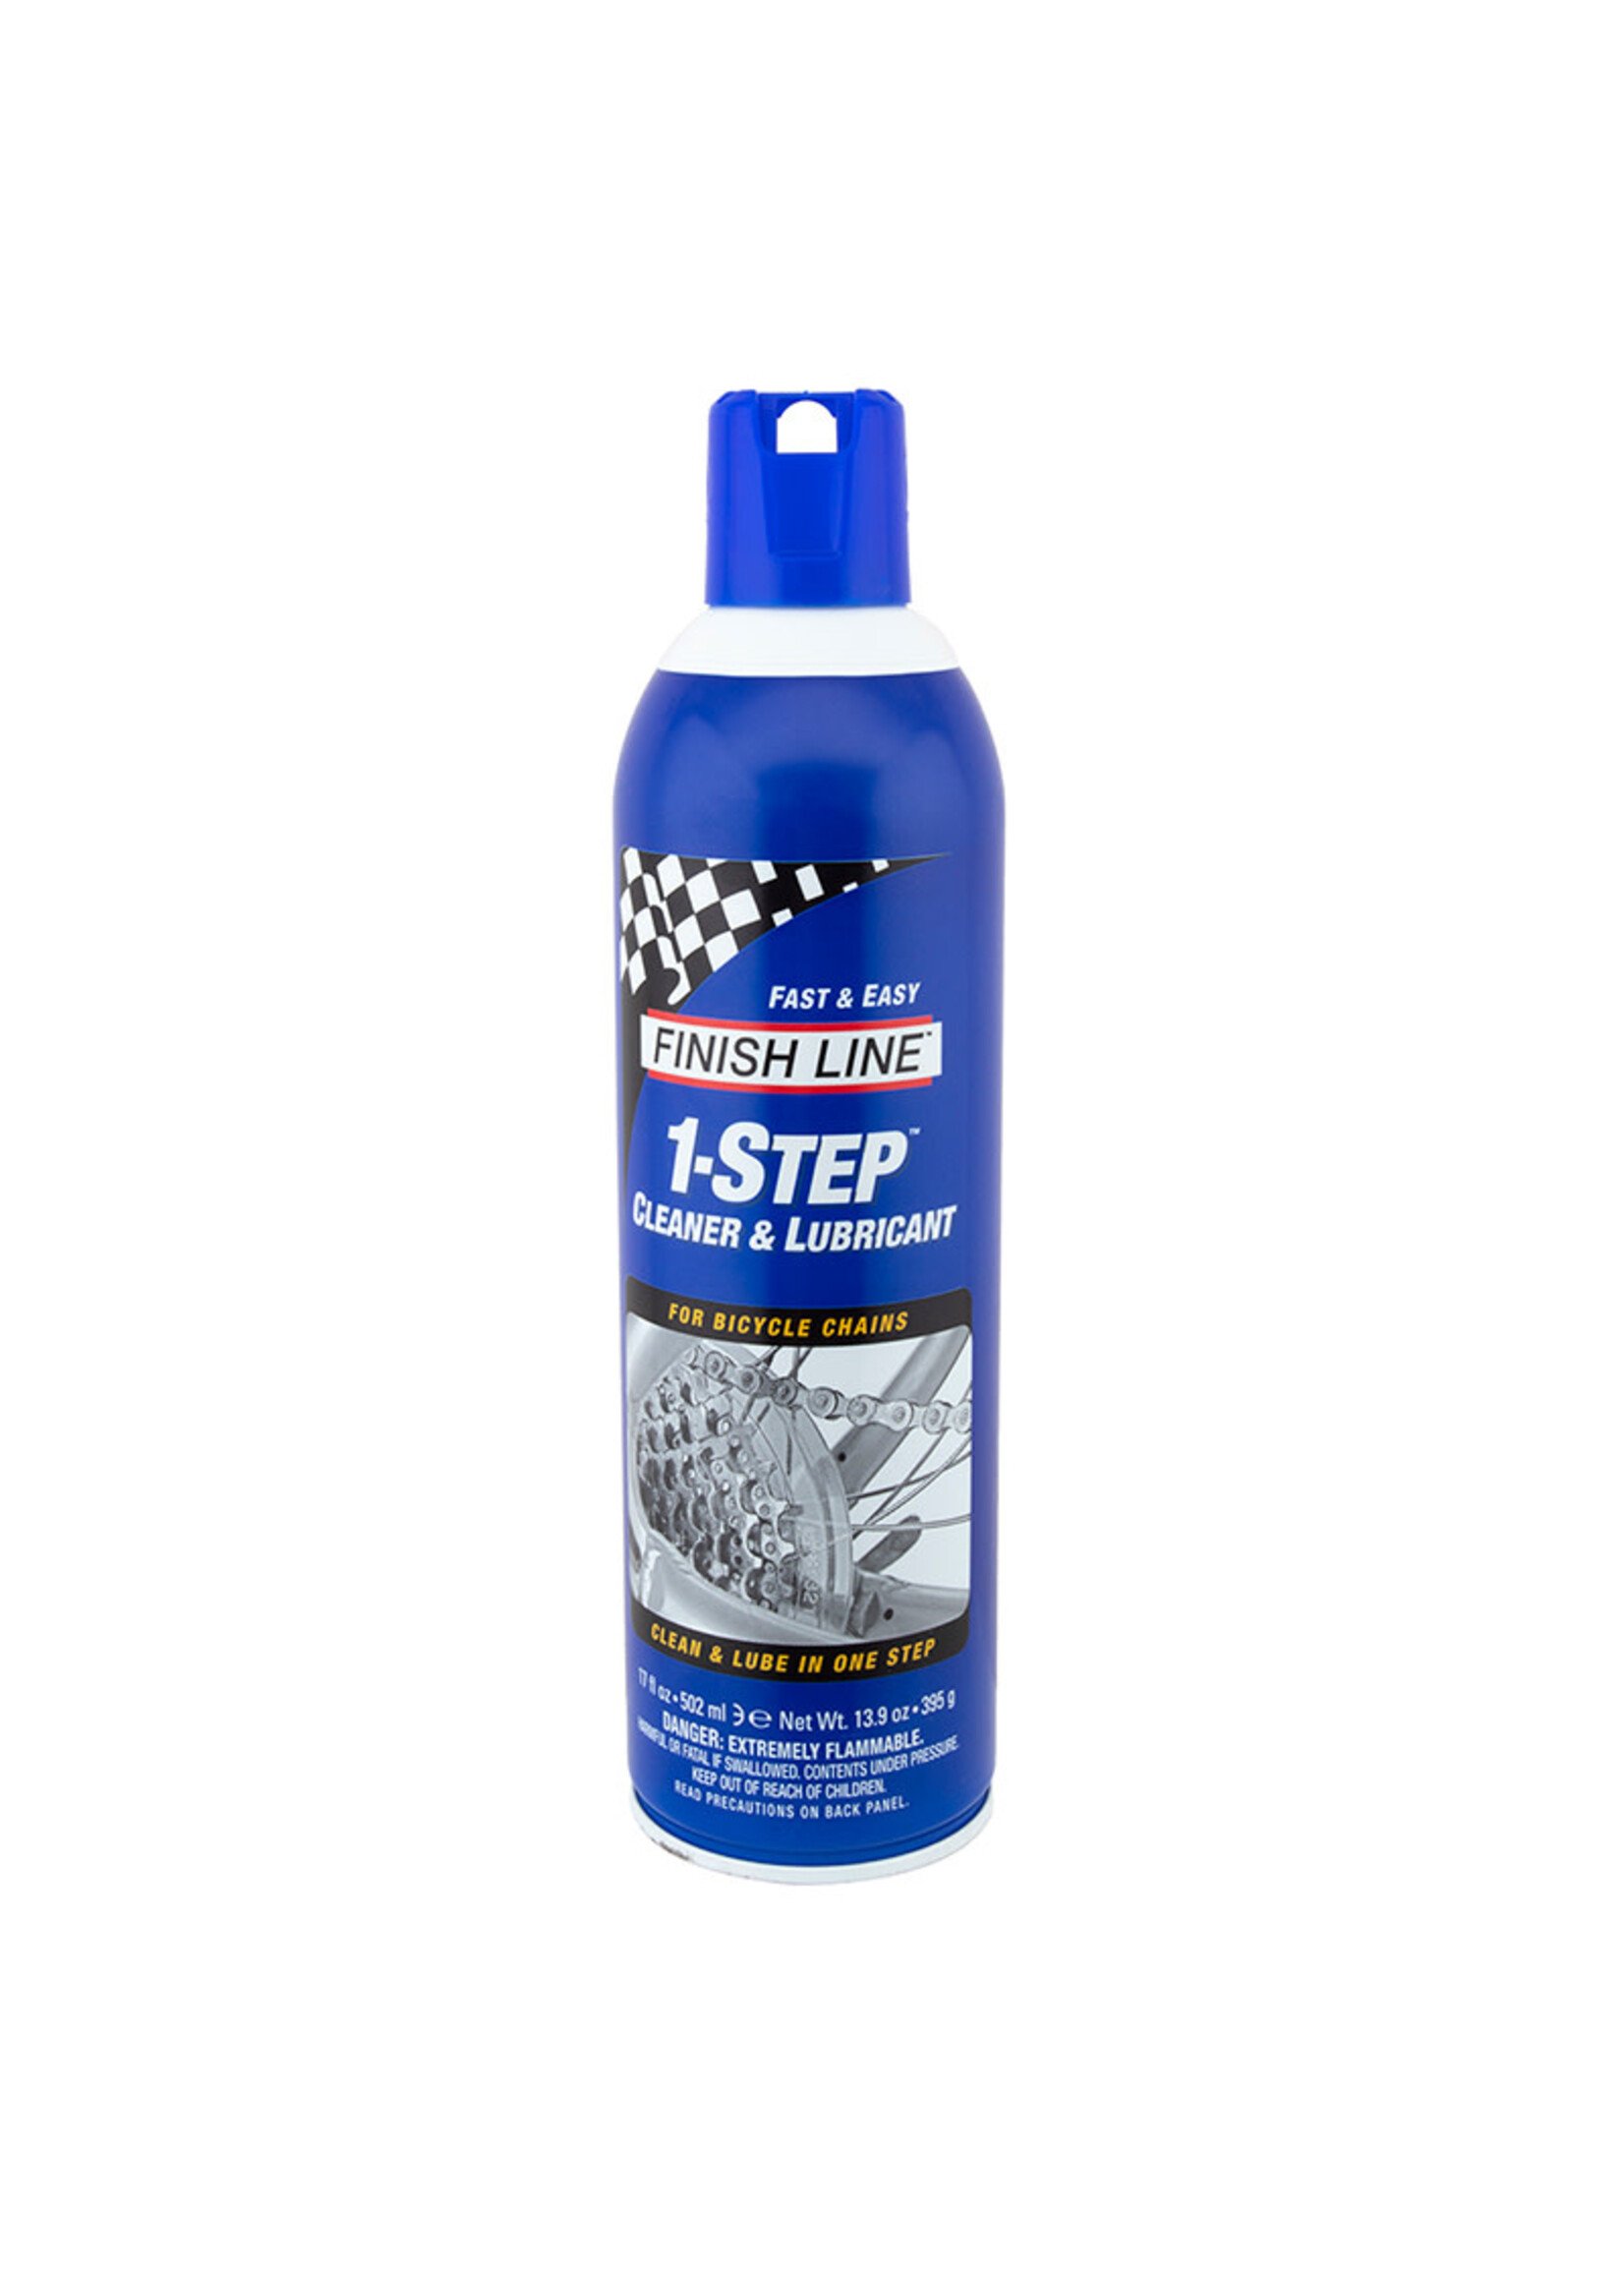 Finish Line Finish Line 1-Step Cleaner & Lubricant 17oz Spray